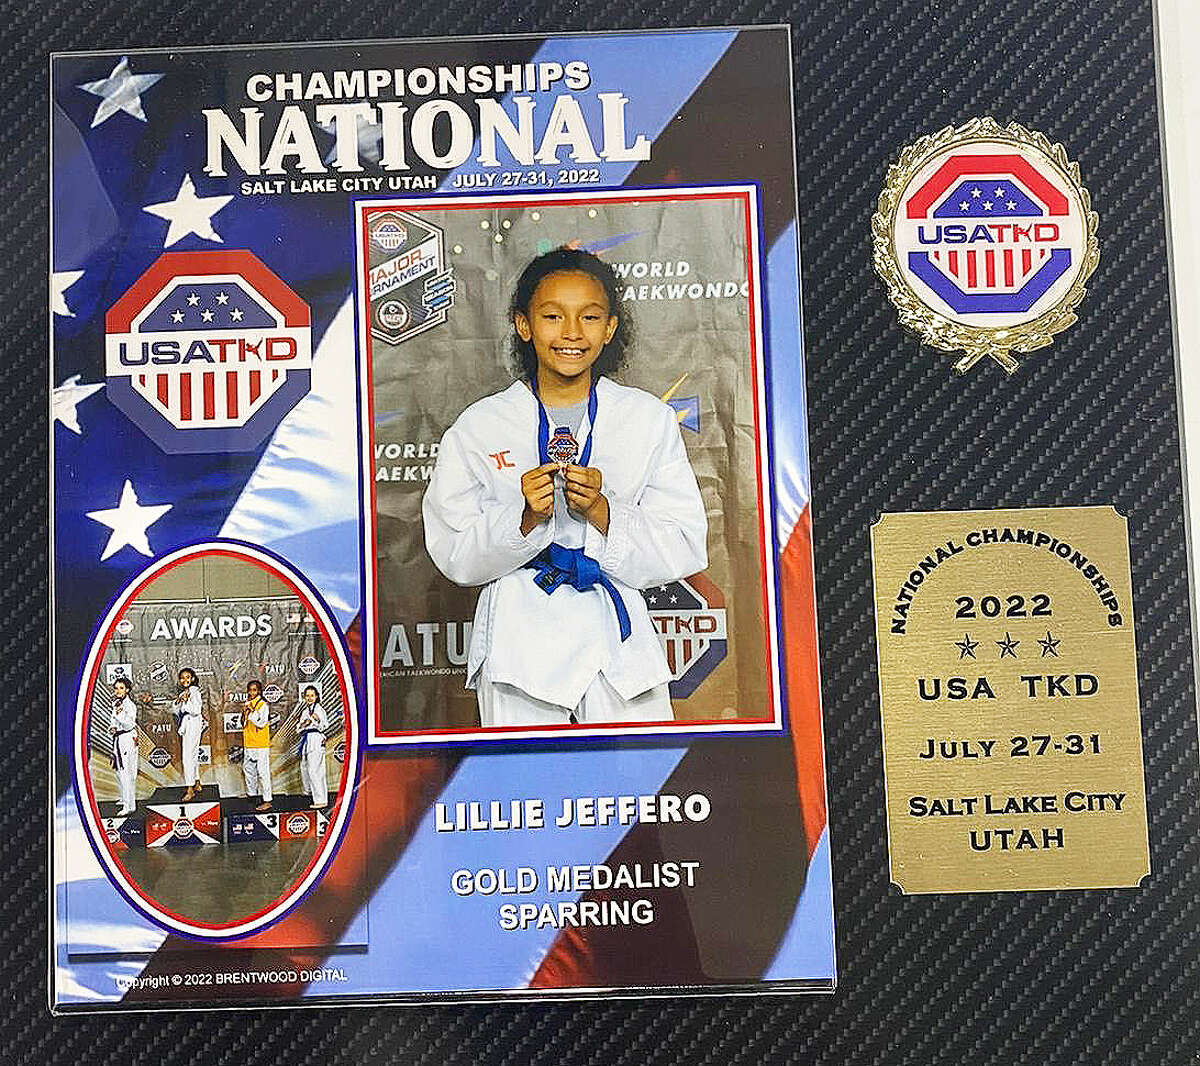 Lillie winning the national title in Olympic sparring -35kg blue belt female youth category in Salt Lake City, Utah recently. The 9-year-old has only been in taekwondo for a little more than a year.